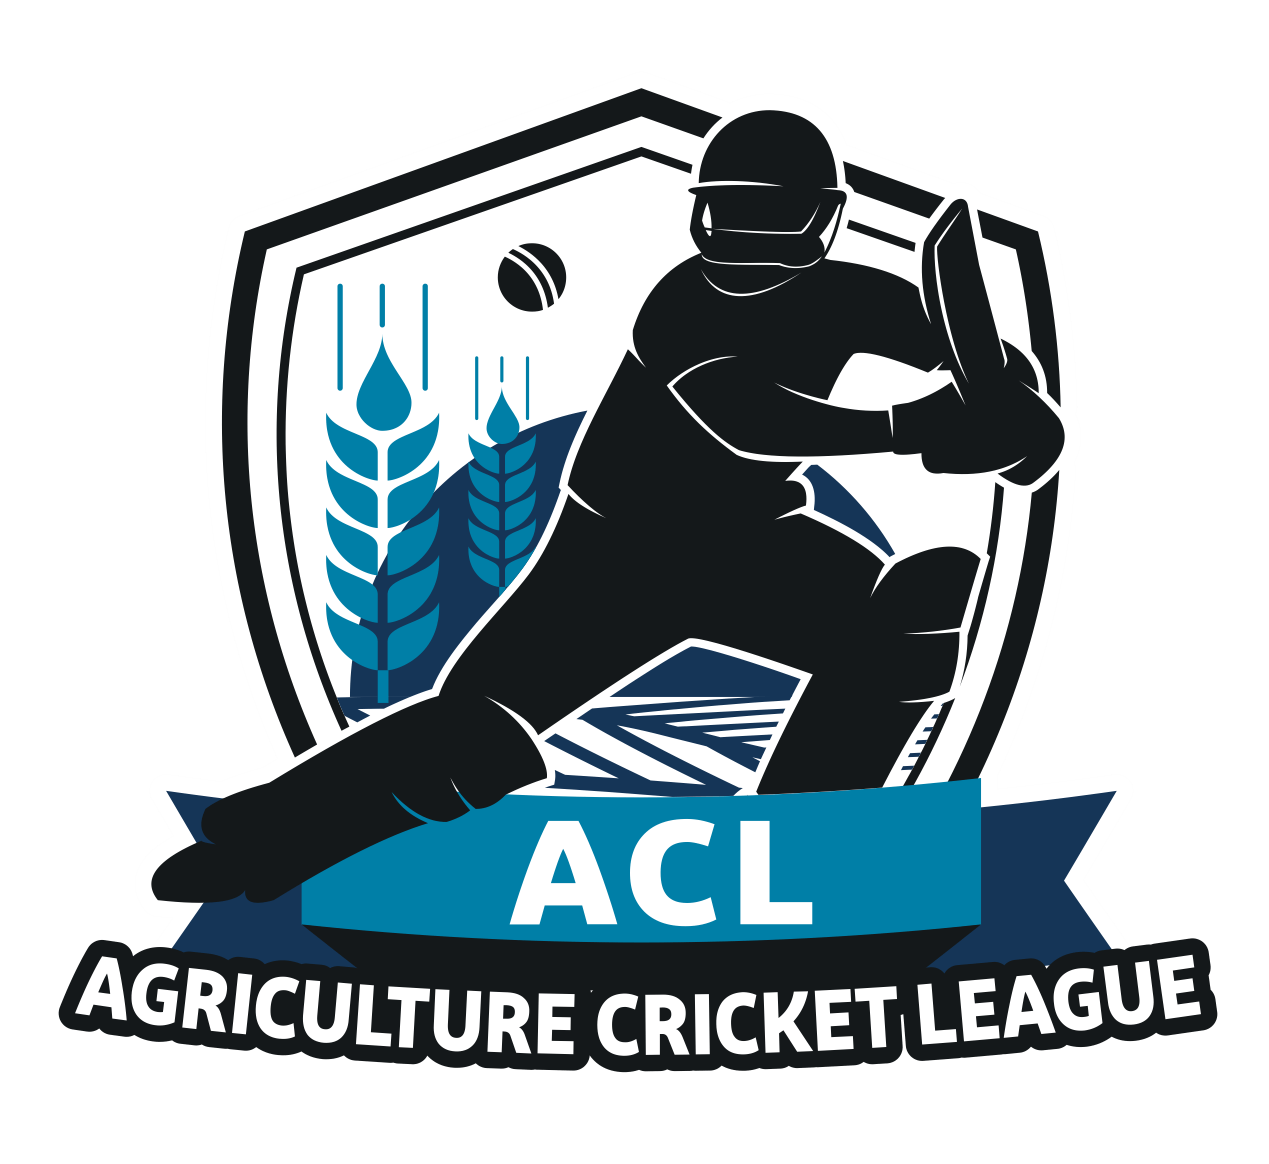 Mobile Growth Cricket League Presented by Branch - Branch